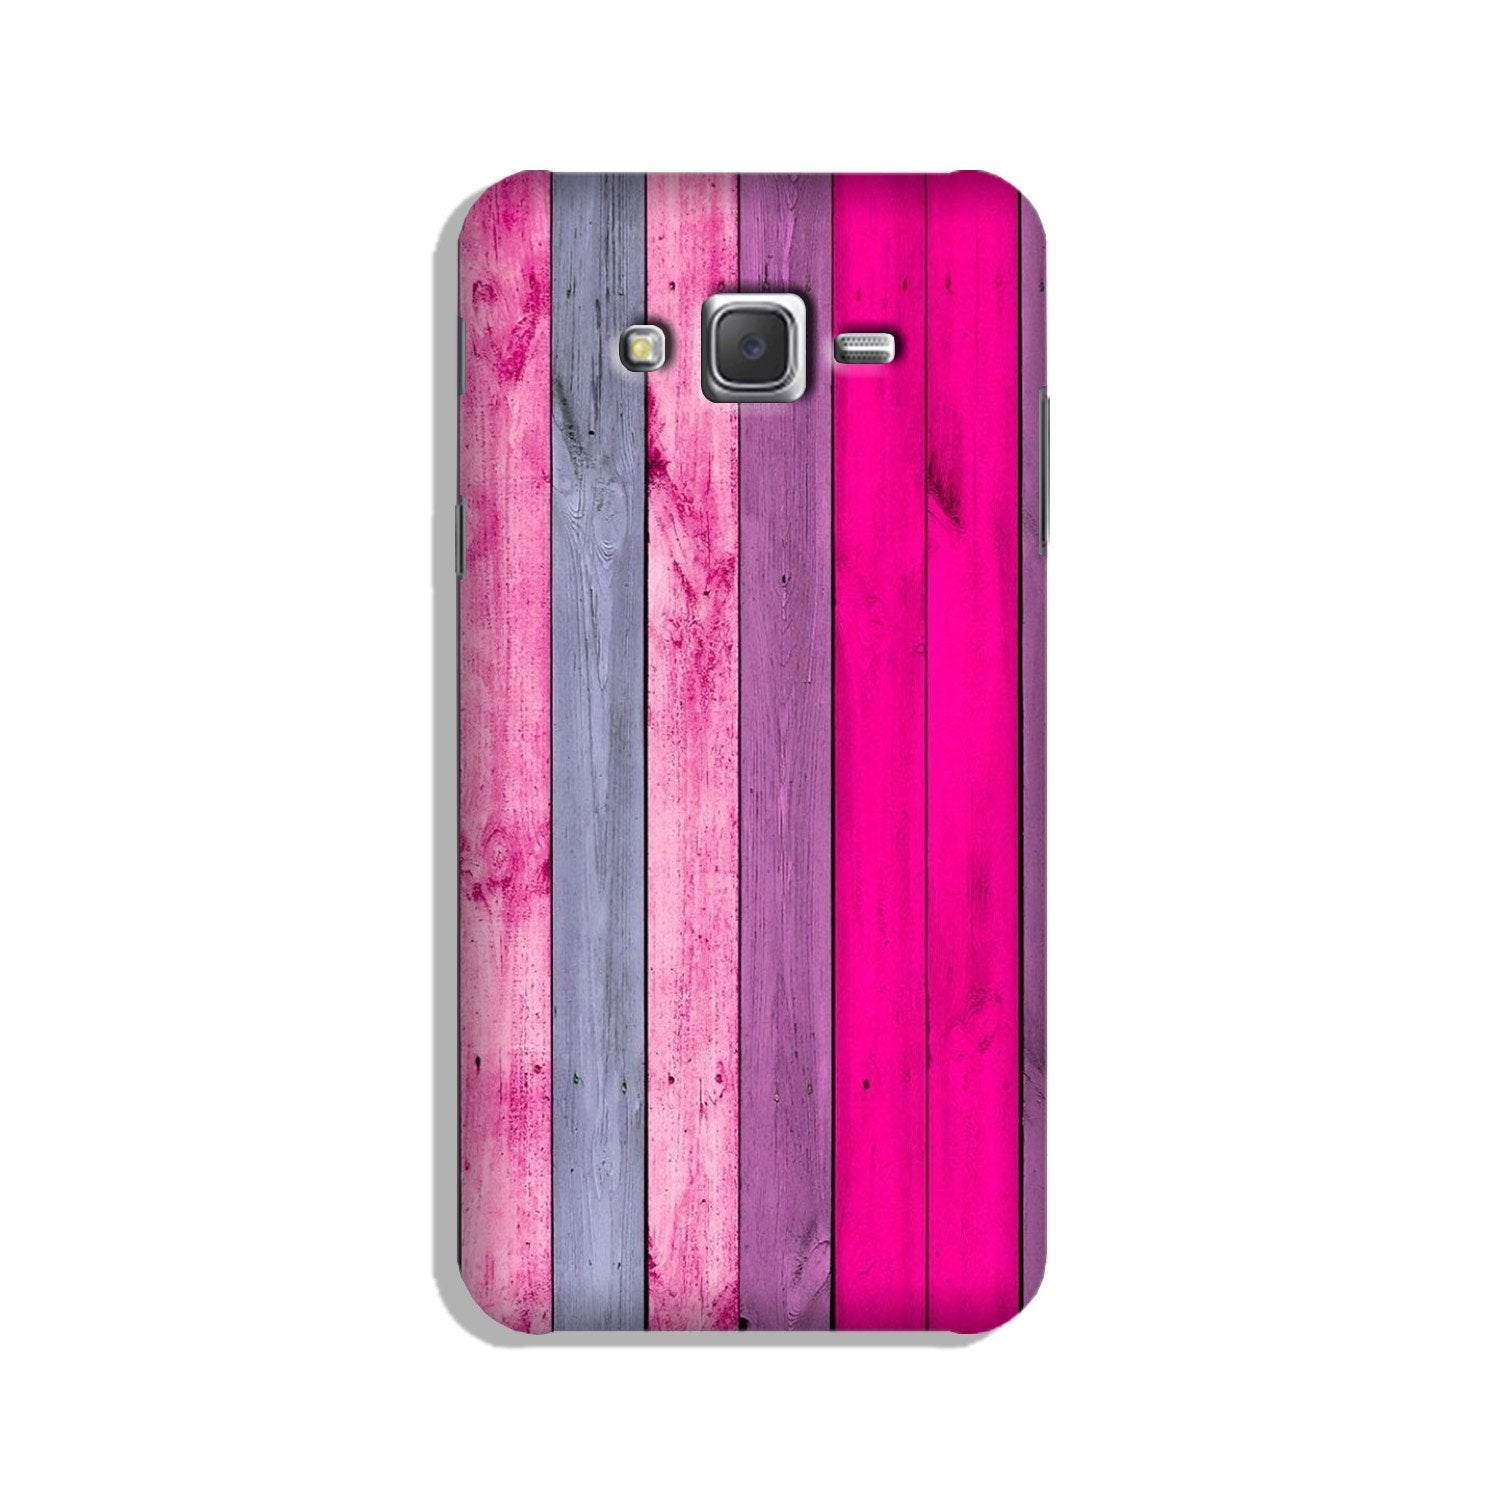 Wooden look Case for Galaxy J7 (2015)